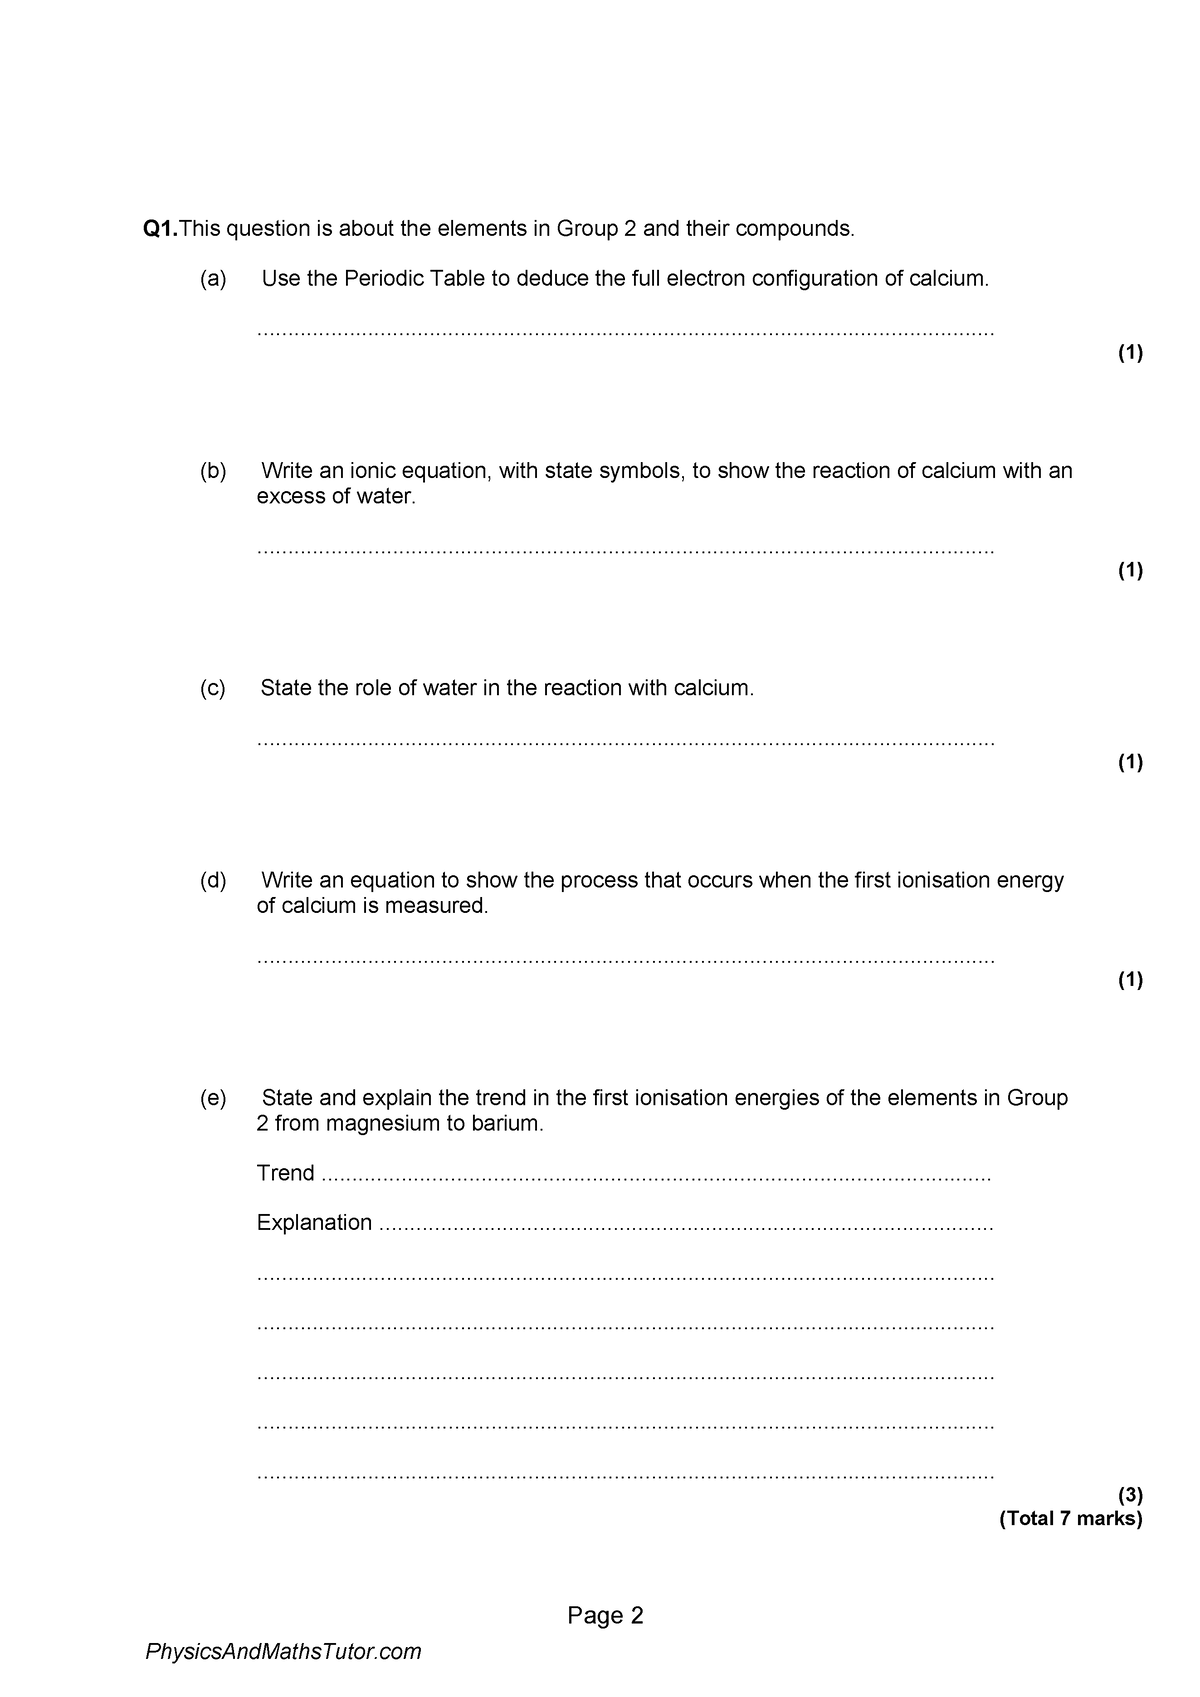 Electron Configuration 1 Question paper - Page 2 Q1. This question is ...